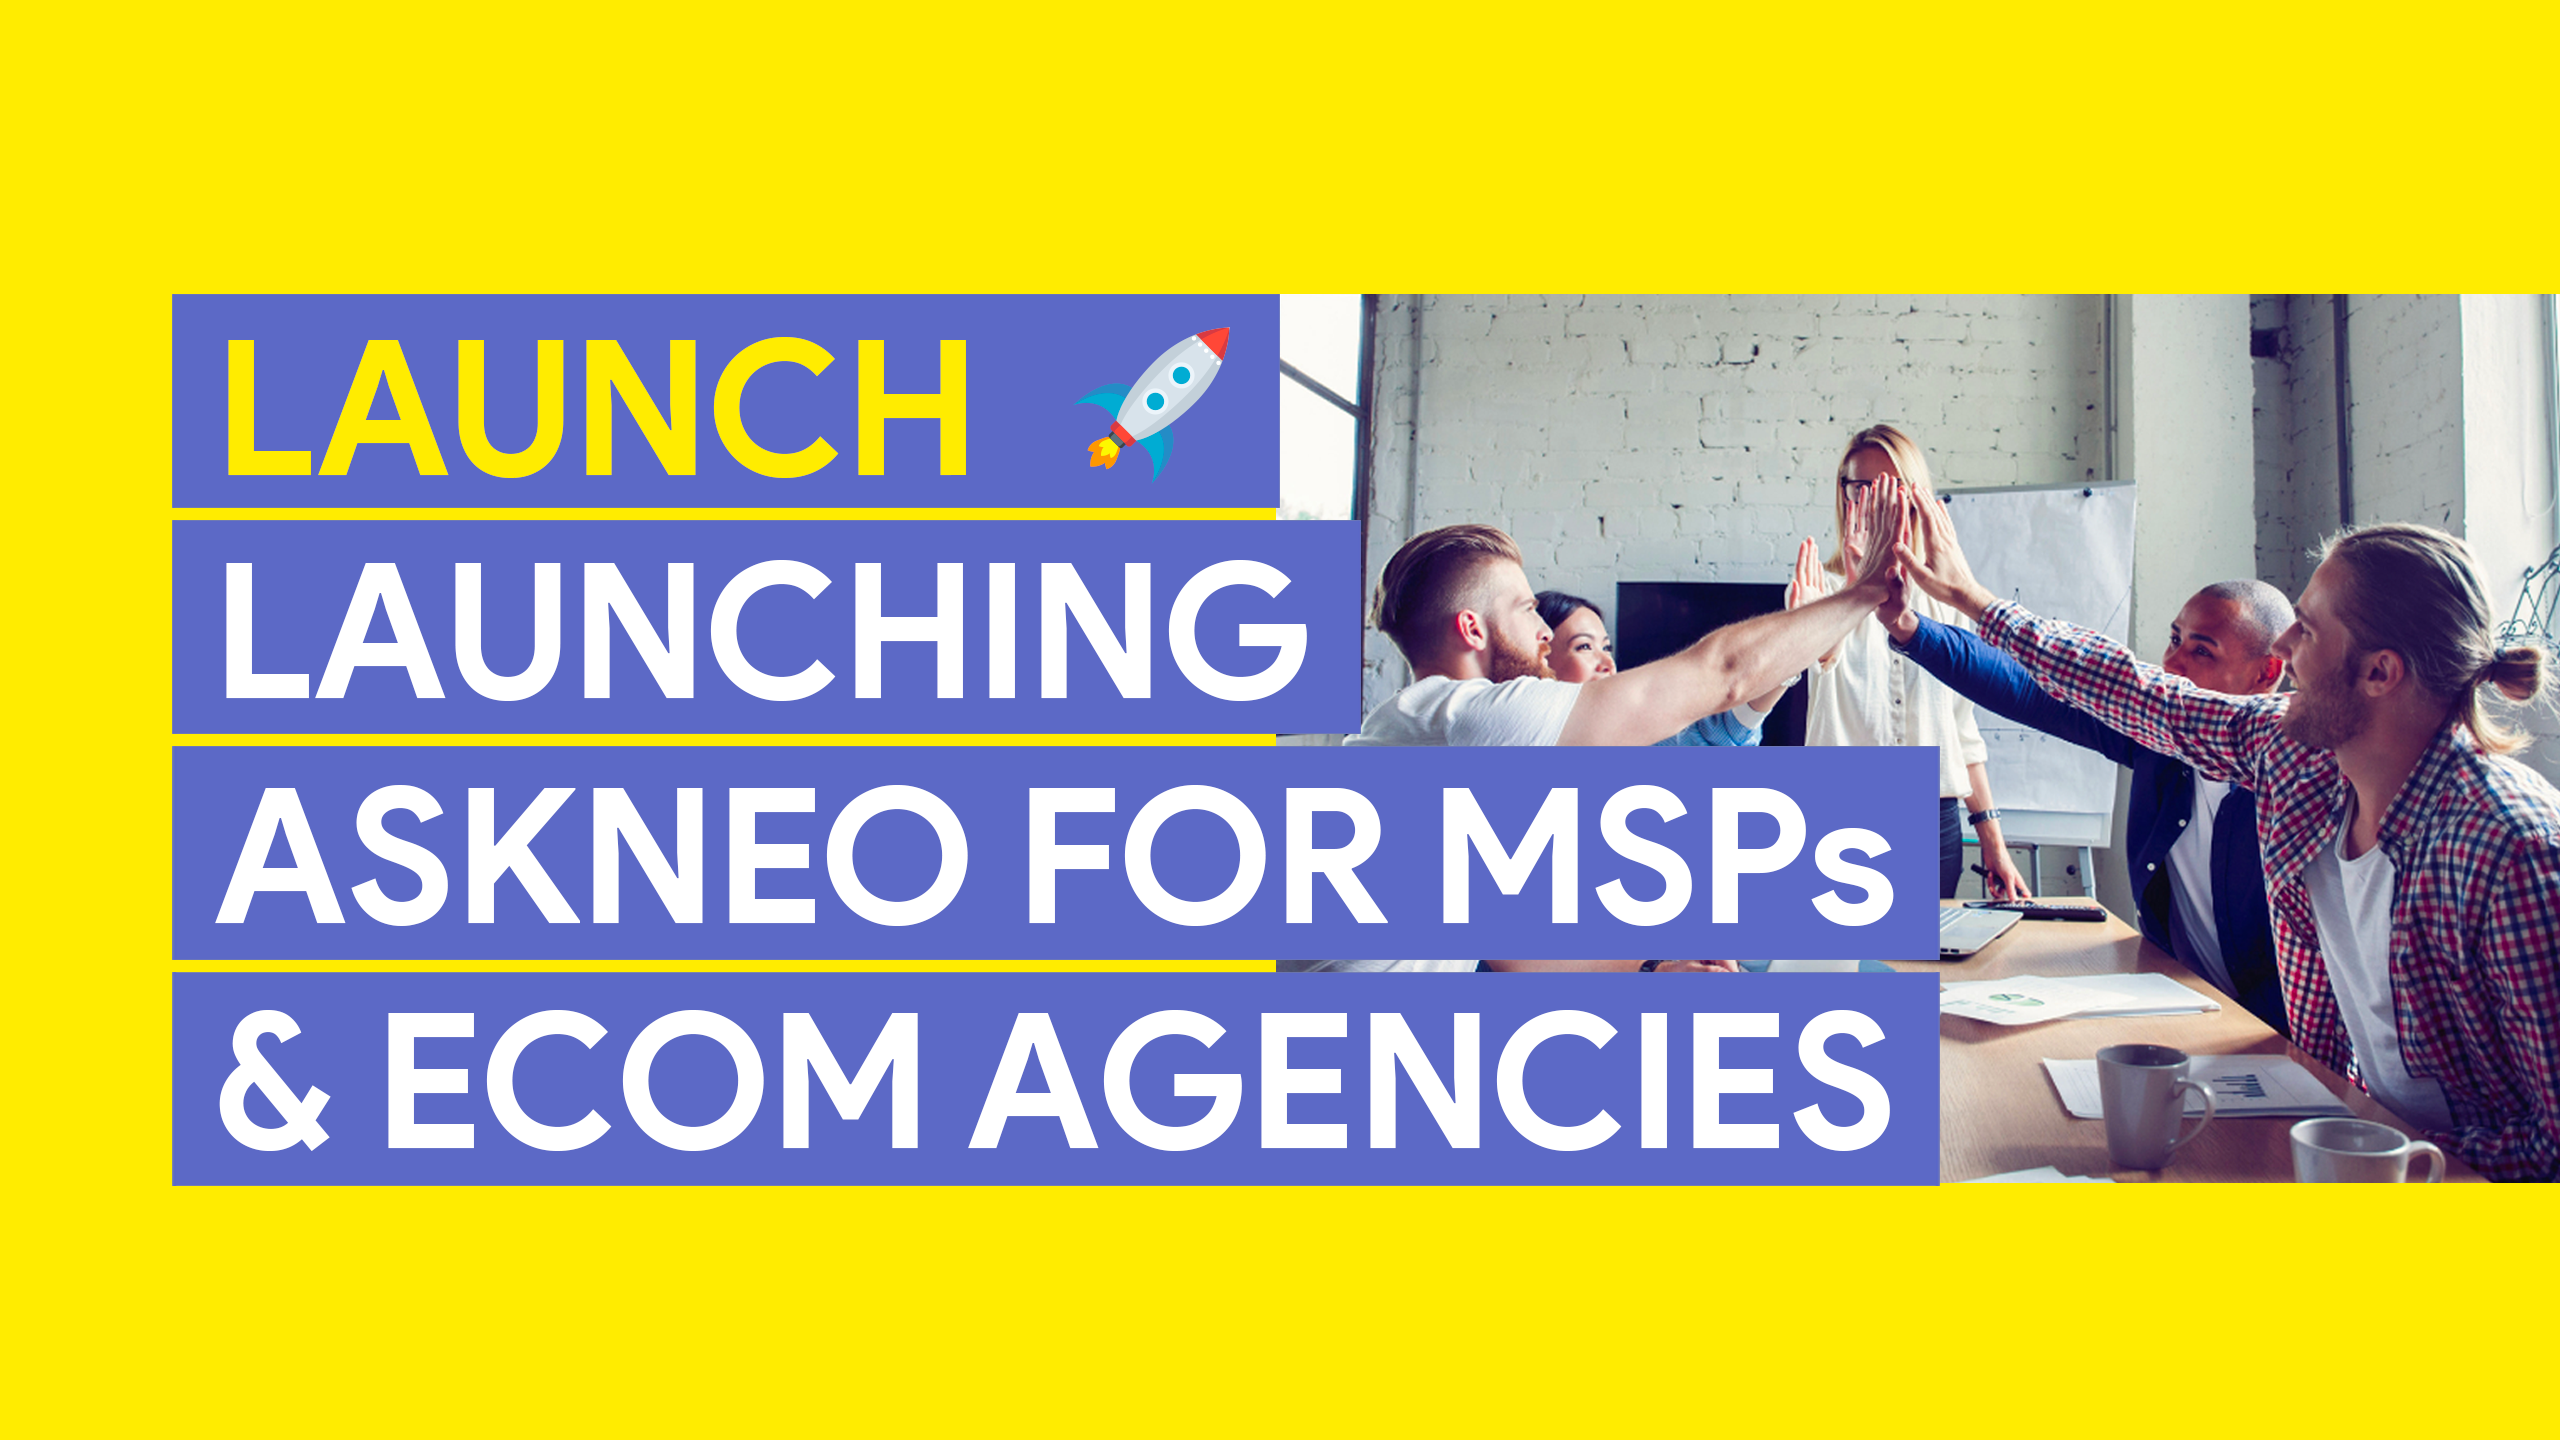 Launching AskNeo for MSPs and eCom Agencies